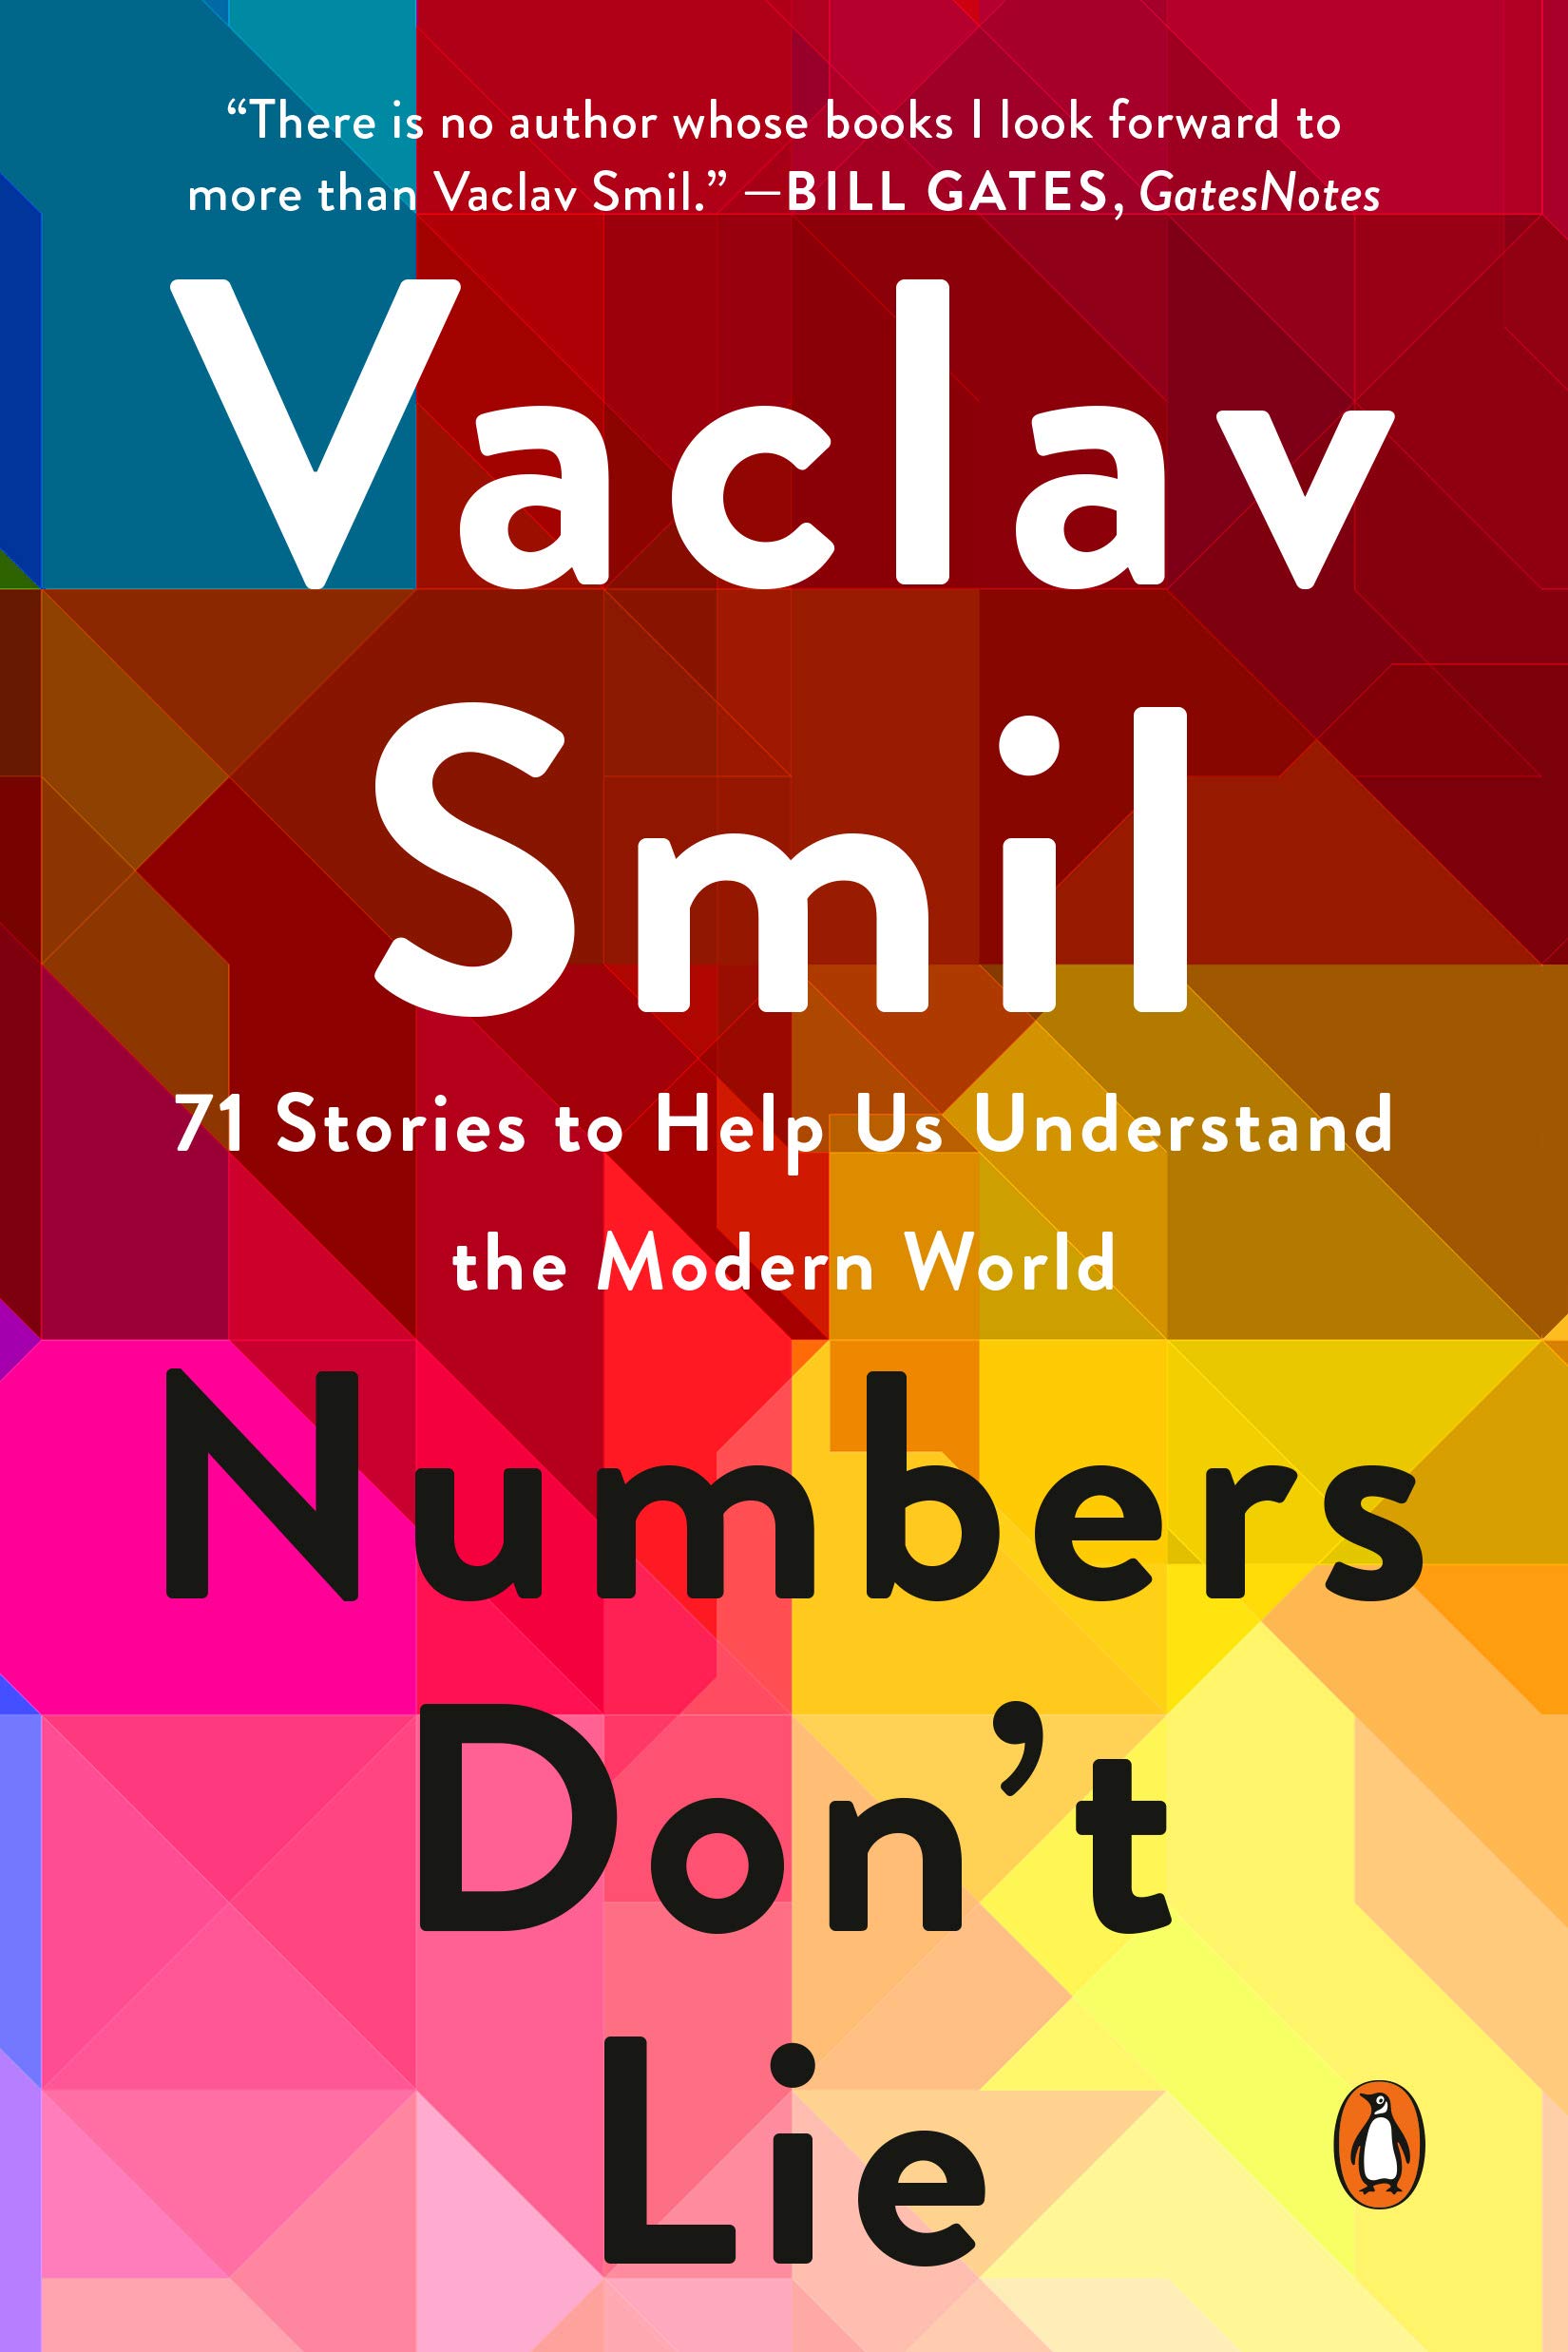 Numbers Don't Lie: 71 Stories to Help Us Understand the Modern World (eBook) by Vaclav Smil $1.99